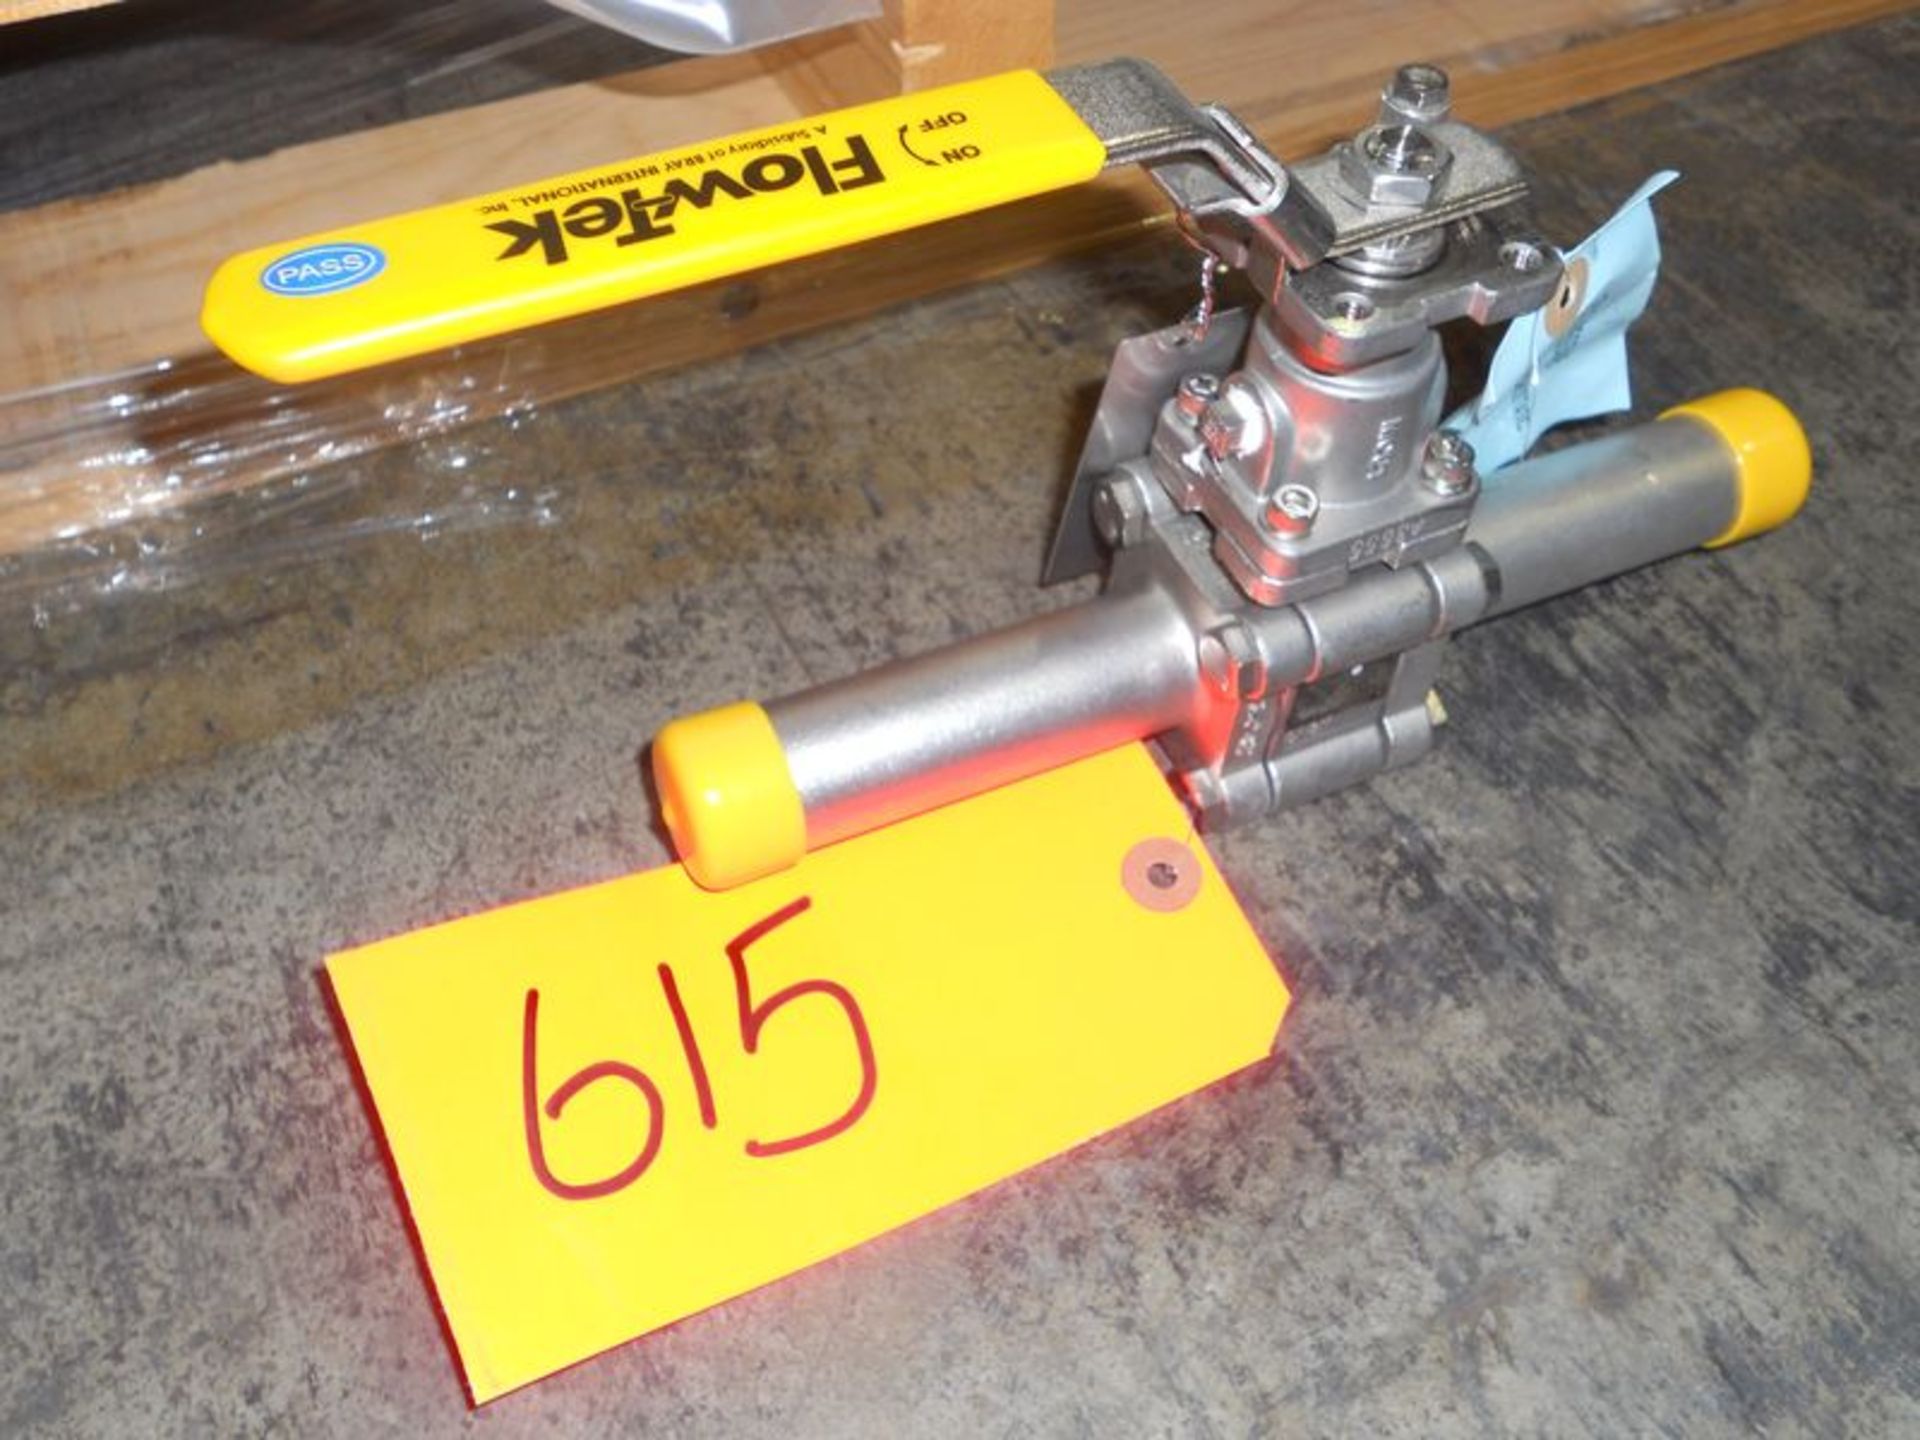 Lot (94) ball valves, M/N TFM-1600, CF8M body, 316 SS ball system, 2200 cwp, 3/4" stainless, weld - Image 2 of 2